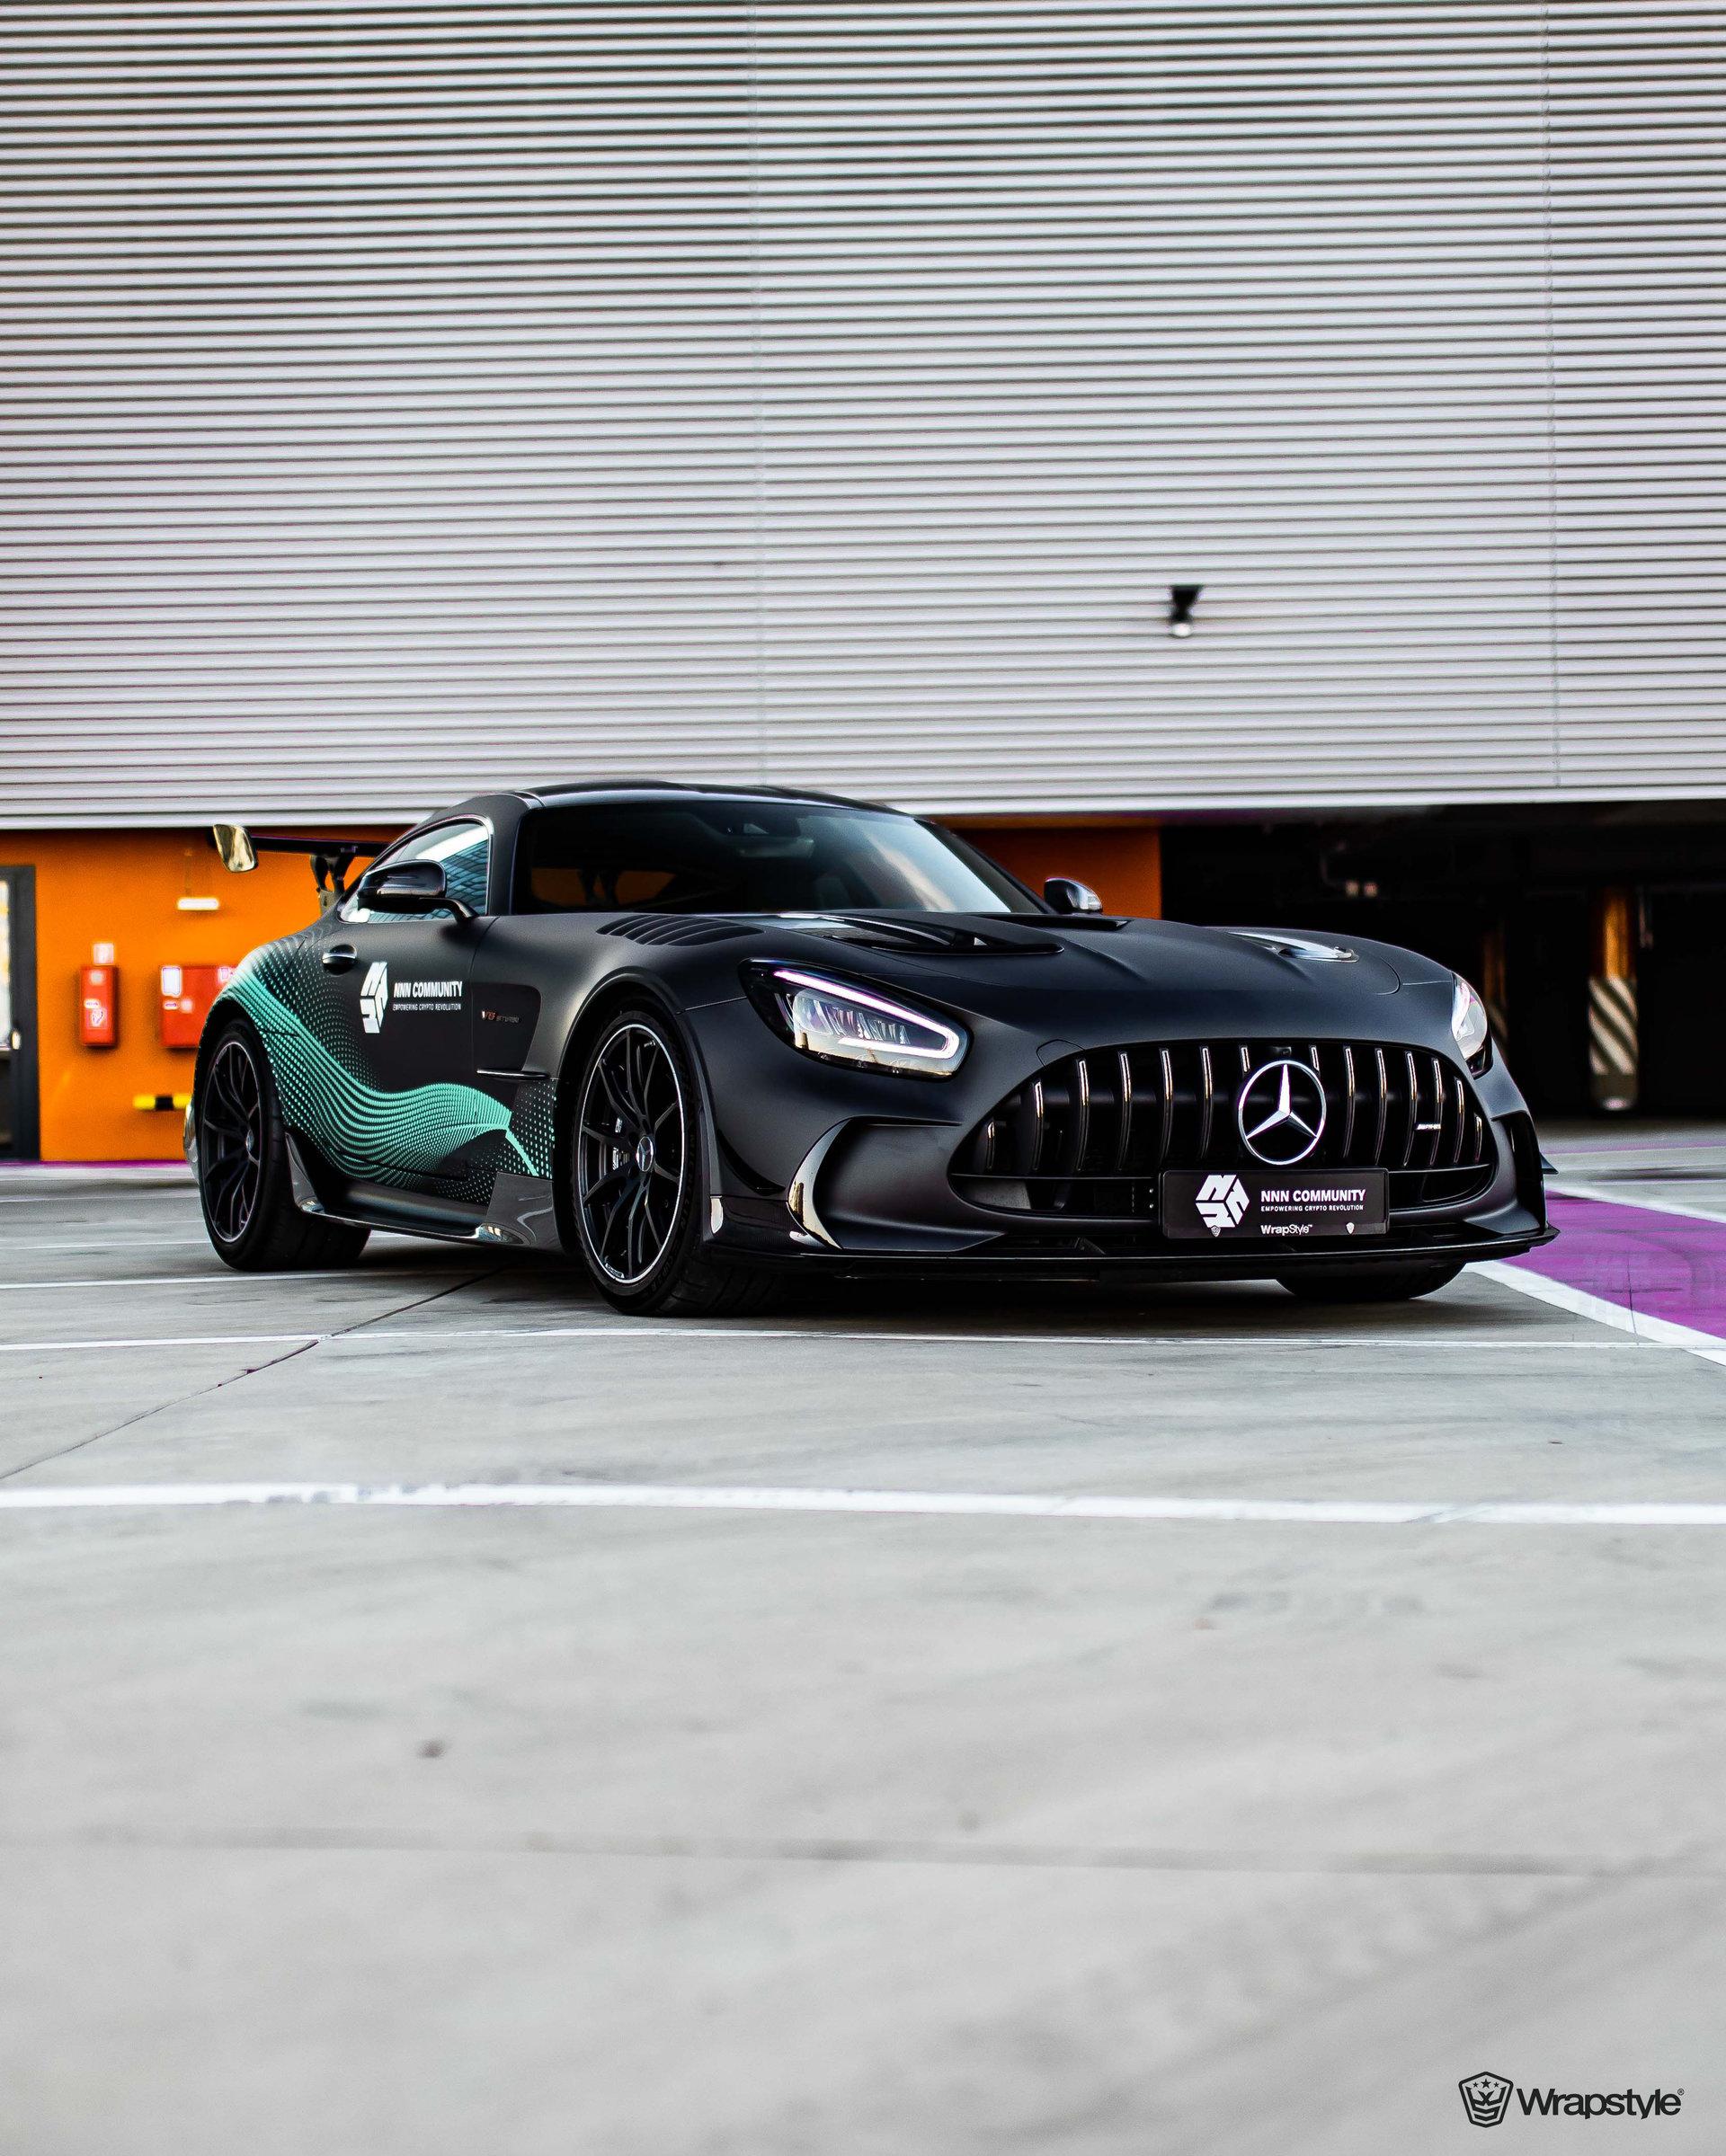 Mercedes Amg Gt Black Series Corporate Wrap Wrapstyle